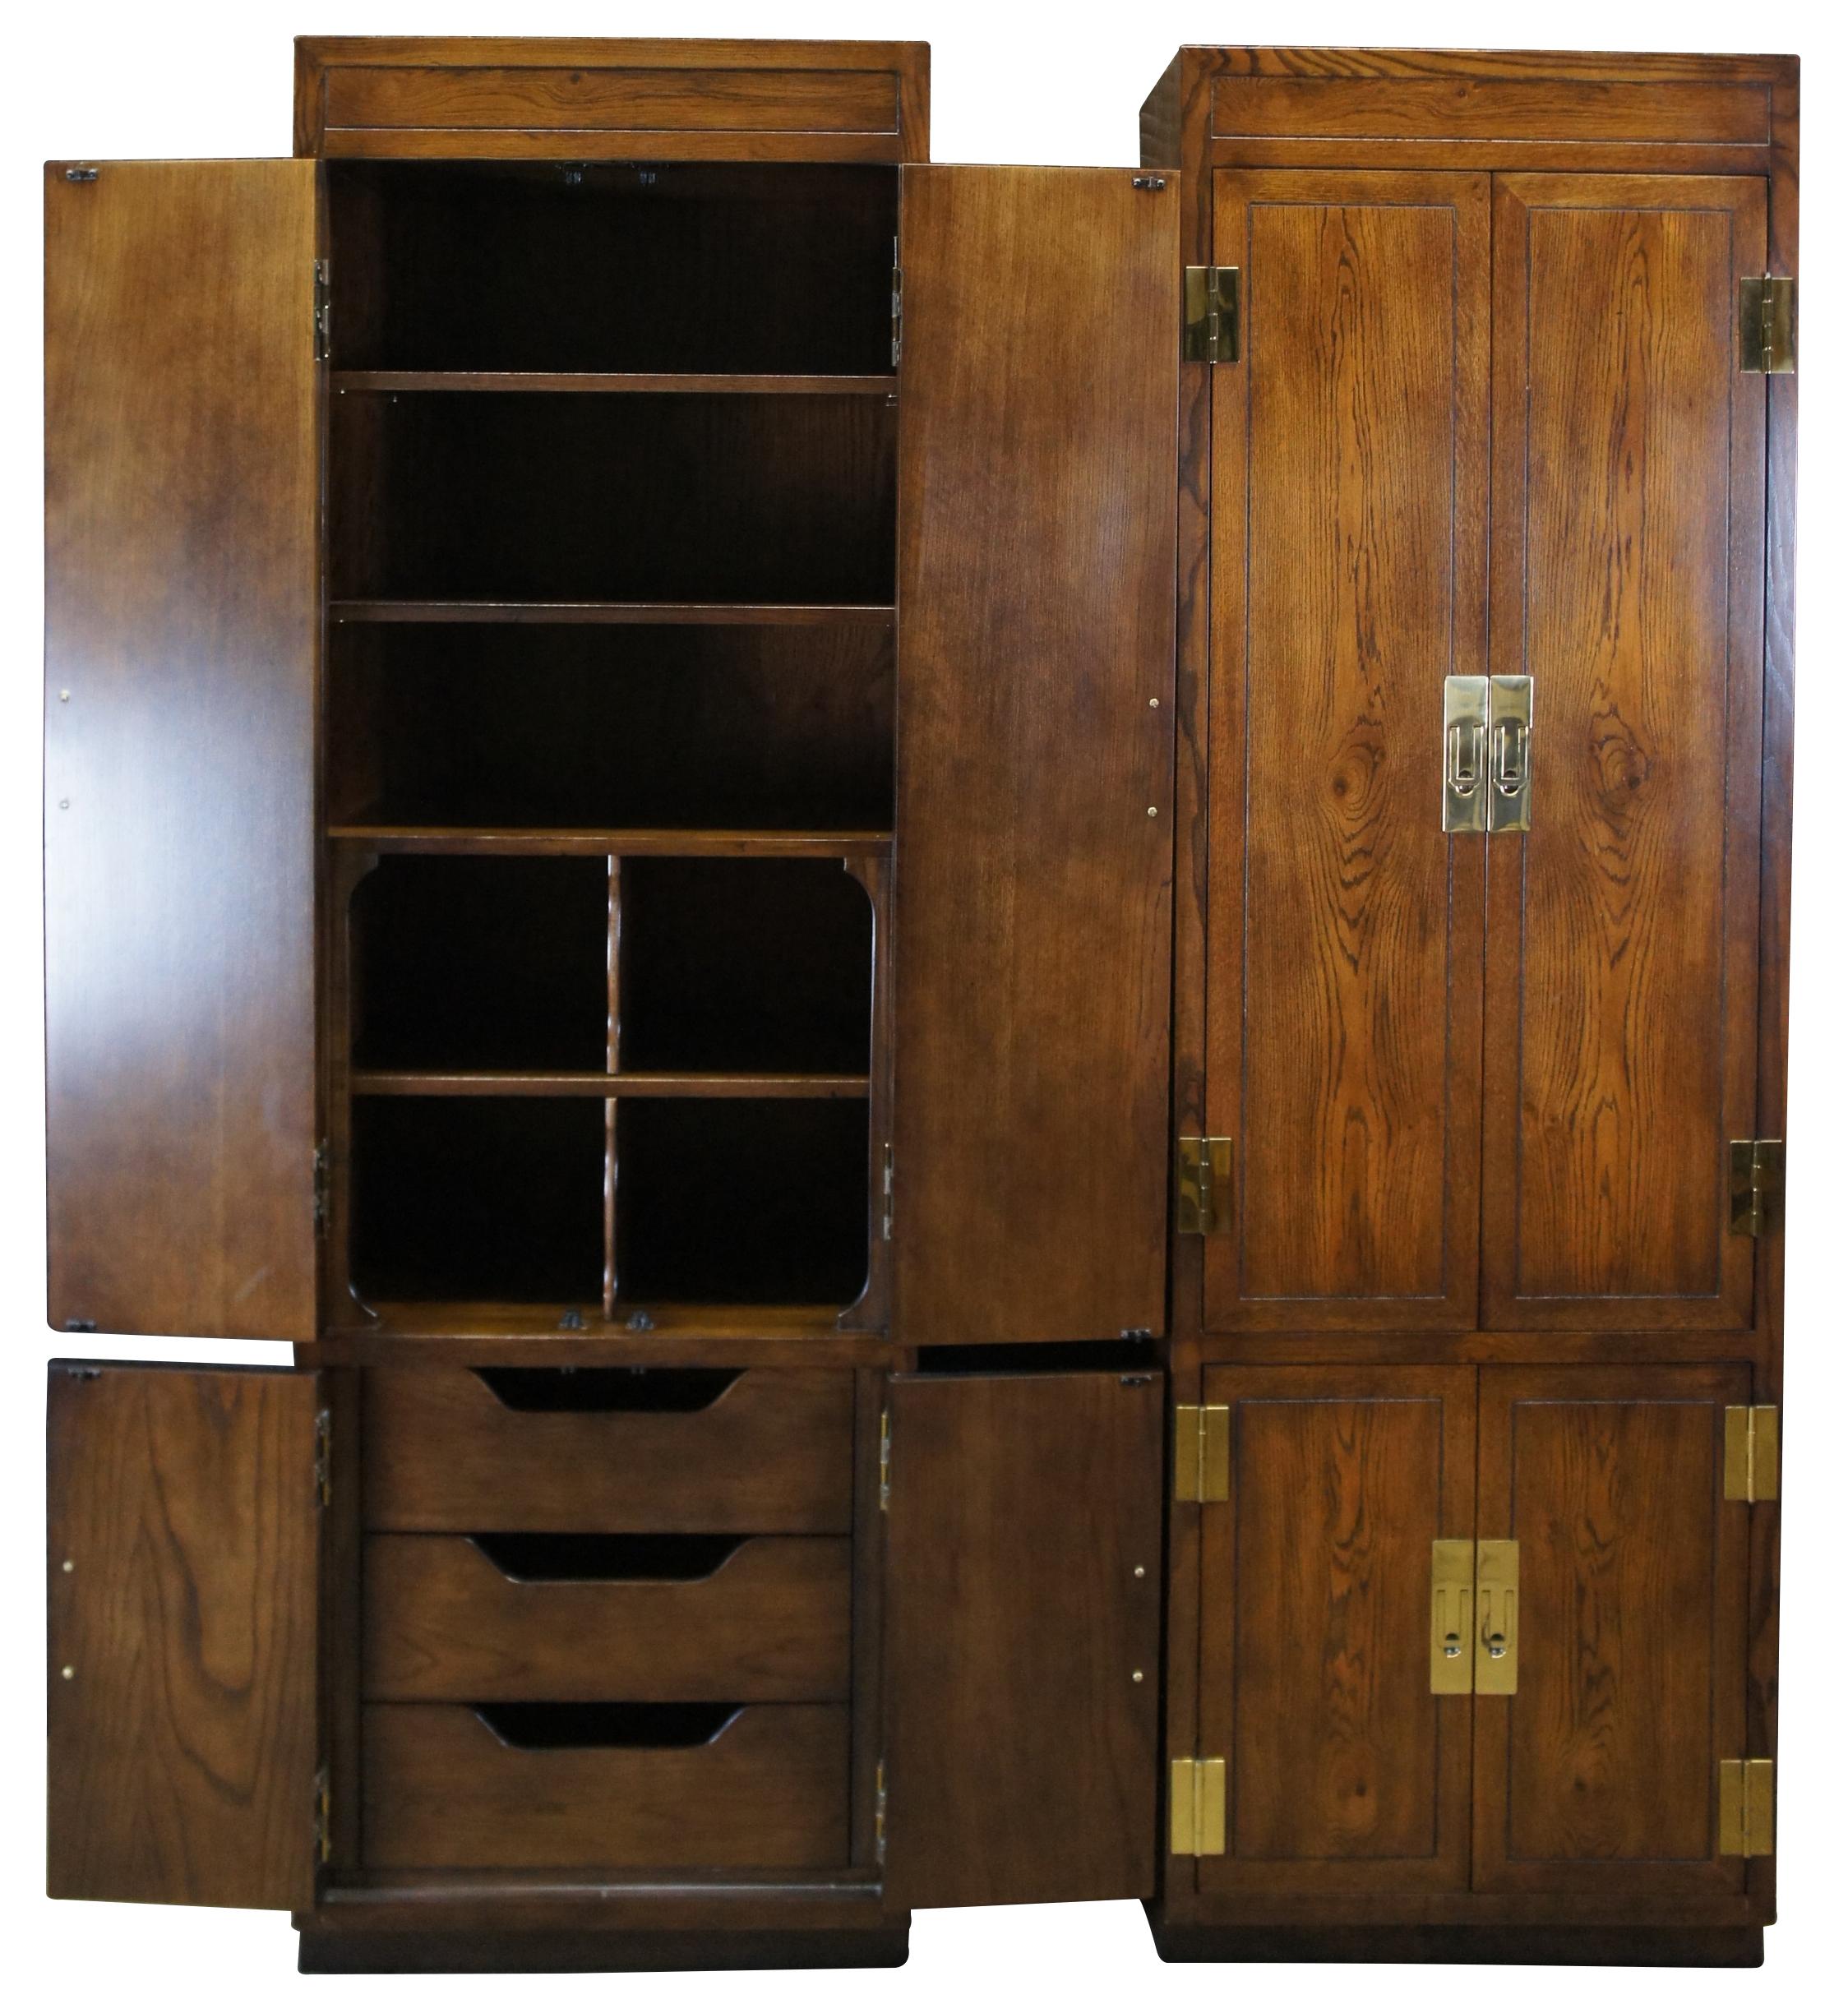 Two vintage Henredon scene I campaign style clothing armoires or wardrobe cabinets. Made of oak featuring upper shelves with four central cubbies and three lower drawers. Accented with modern brass hardware. Circa 1986s. 9100-05. 3162890. Measures: